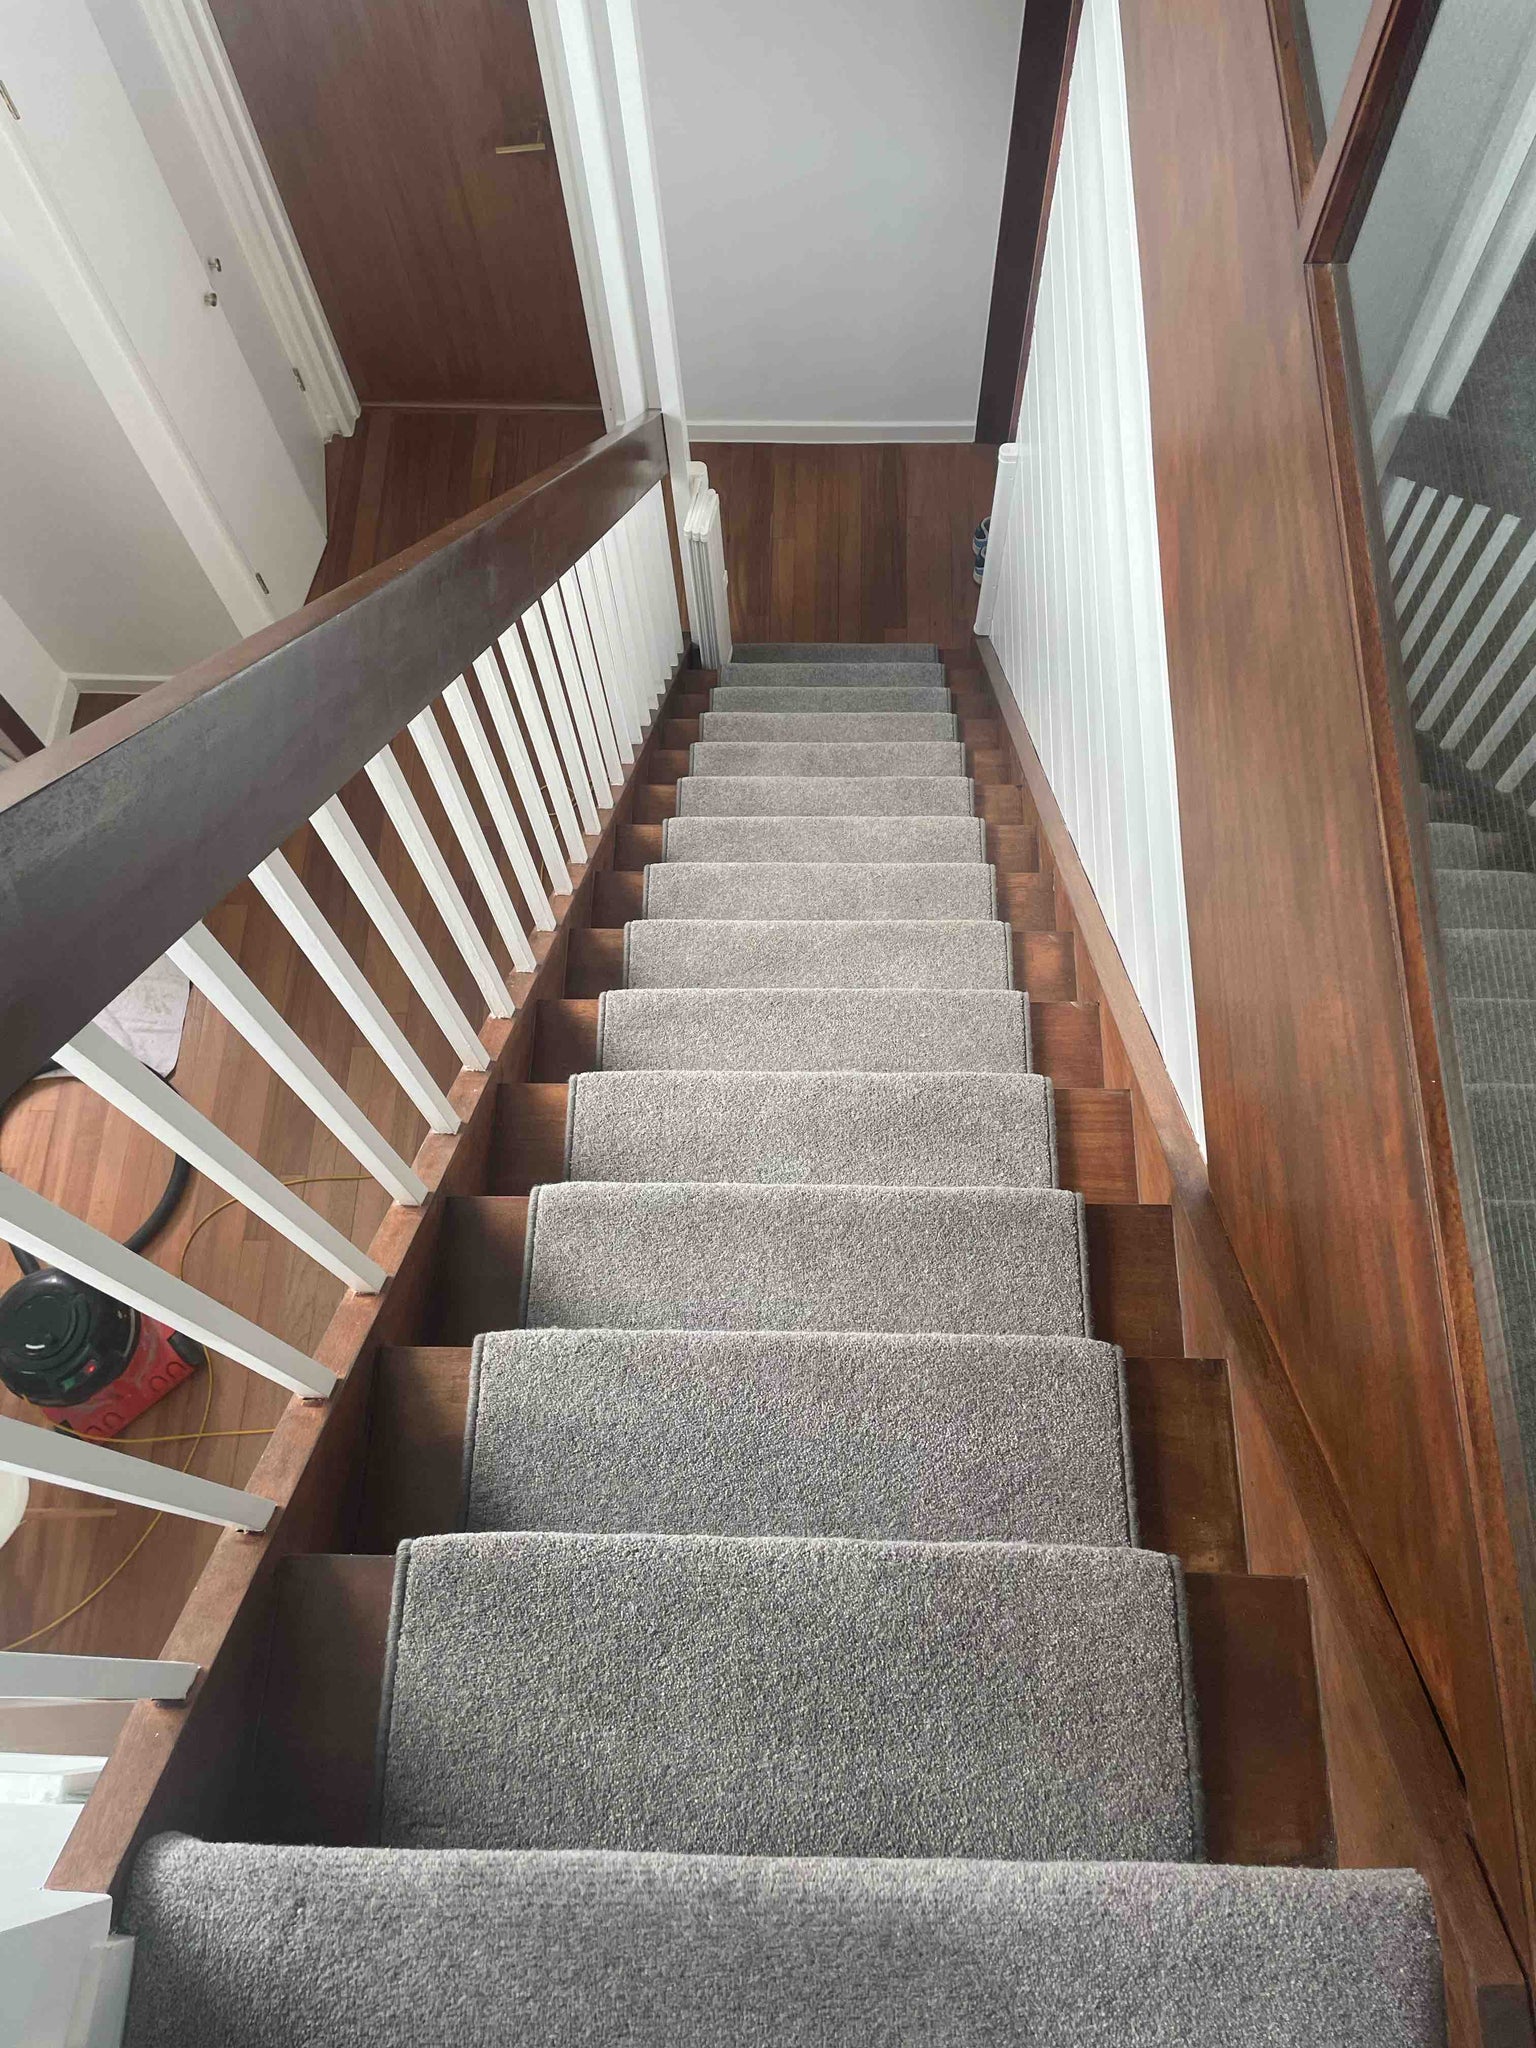 Grey carpet stair runner with whipped edge, stain resistant, Cormar Apollo Plus